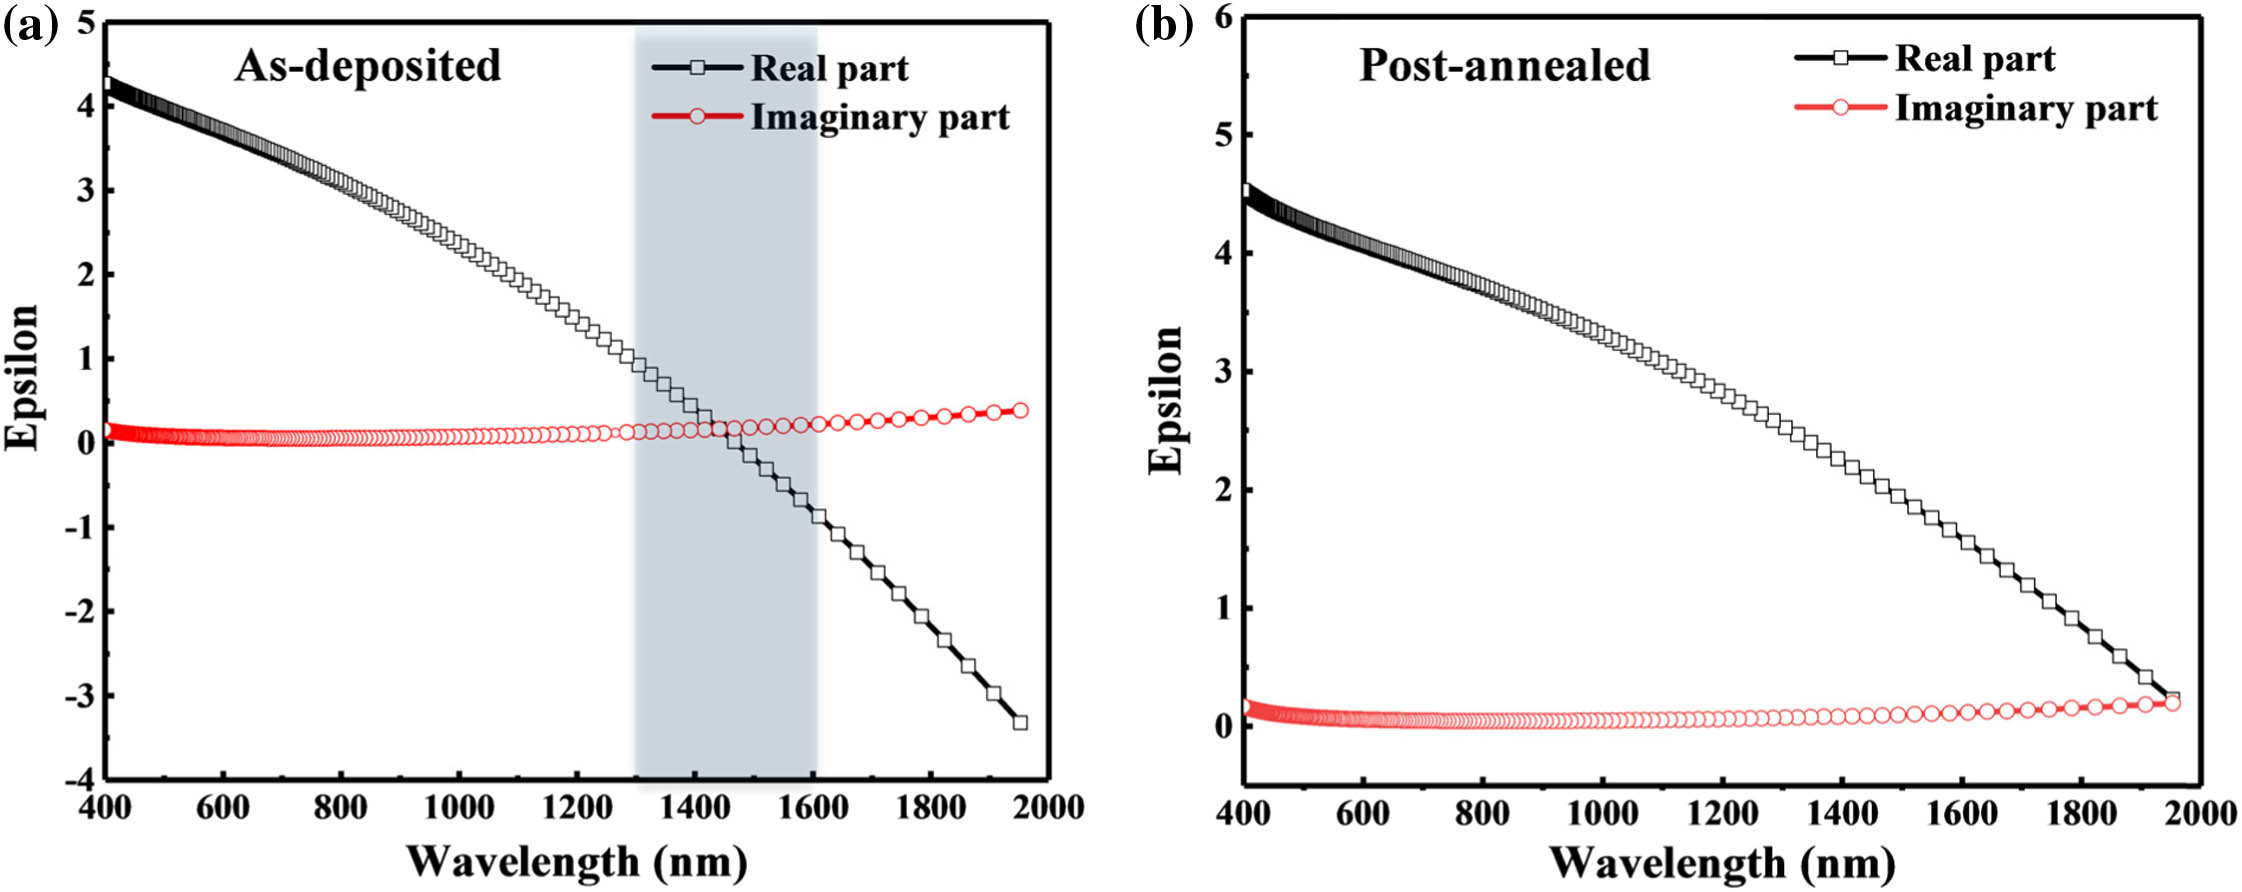 Real and imaginary components of the permittivity of ITO films. (a) As-deposited ITO film. (b) Post-annealed ITO film.